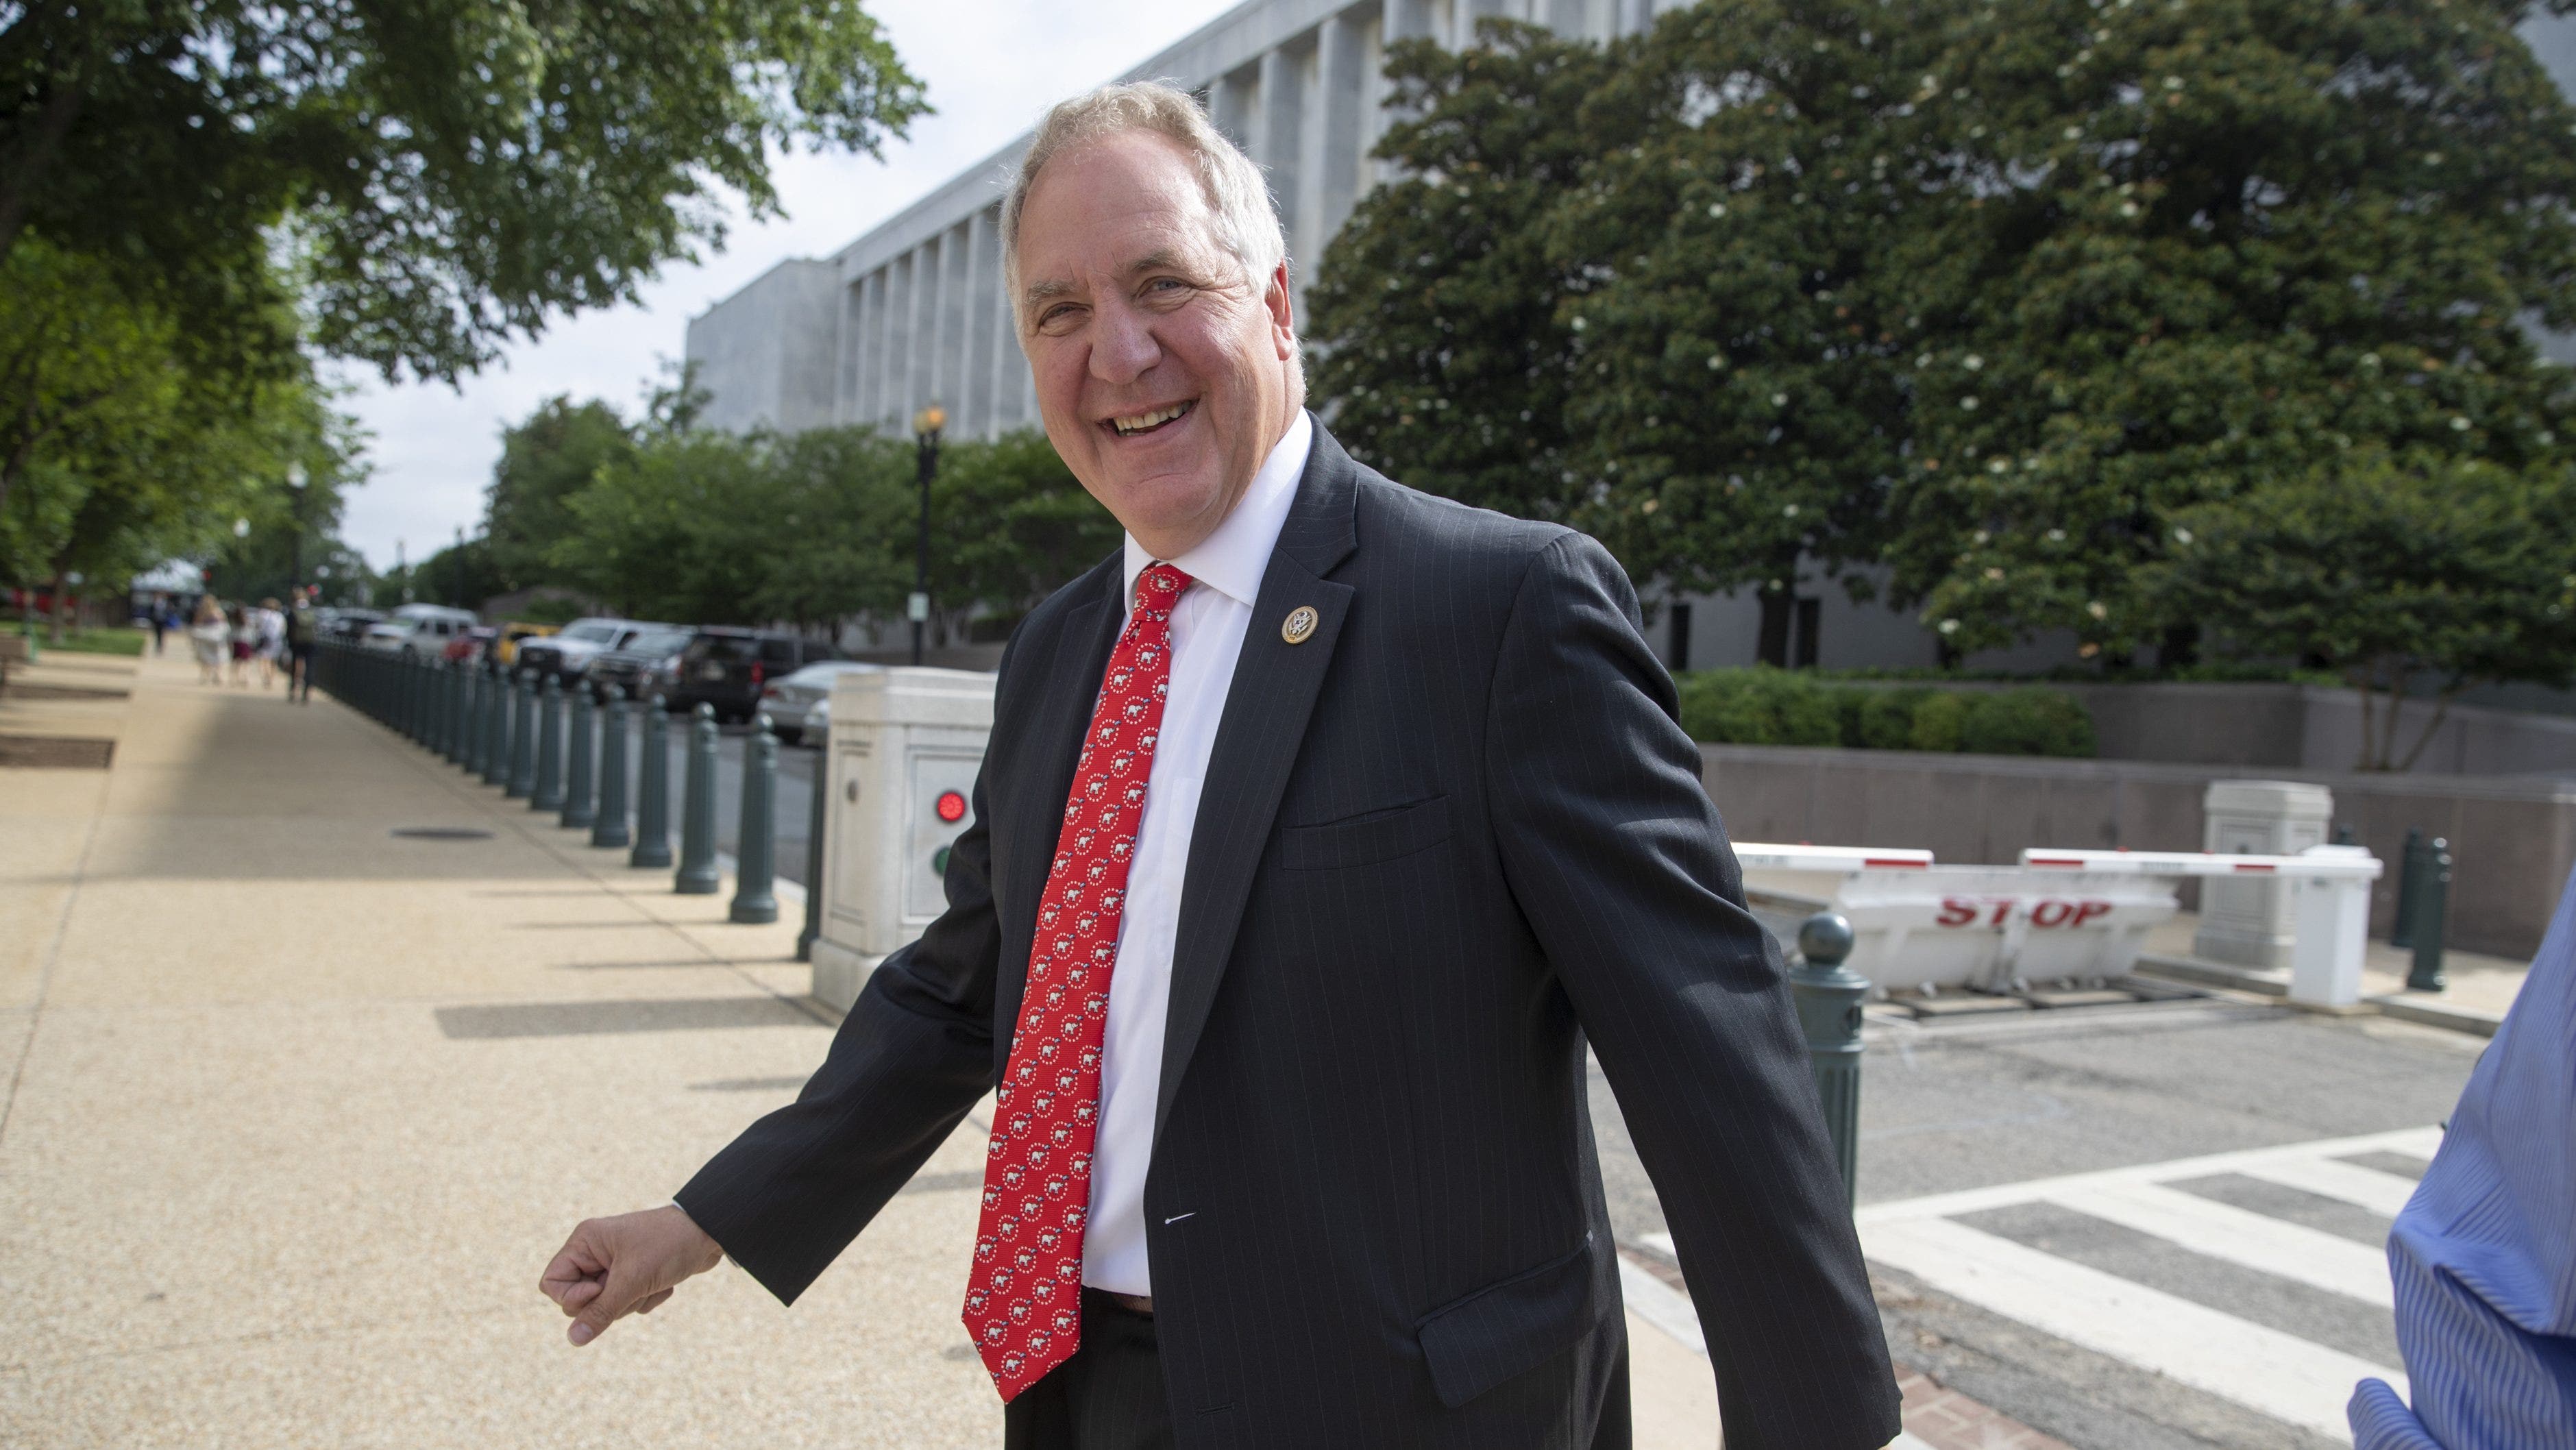 Rep. John Shimkus becomes latest Republican lawmaker to retire from Congress